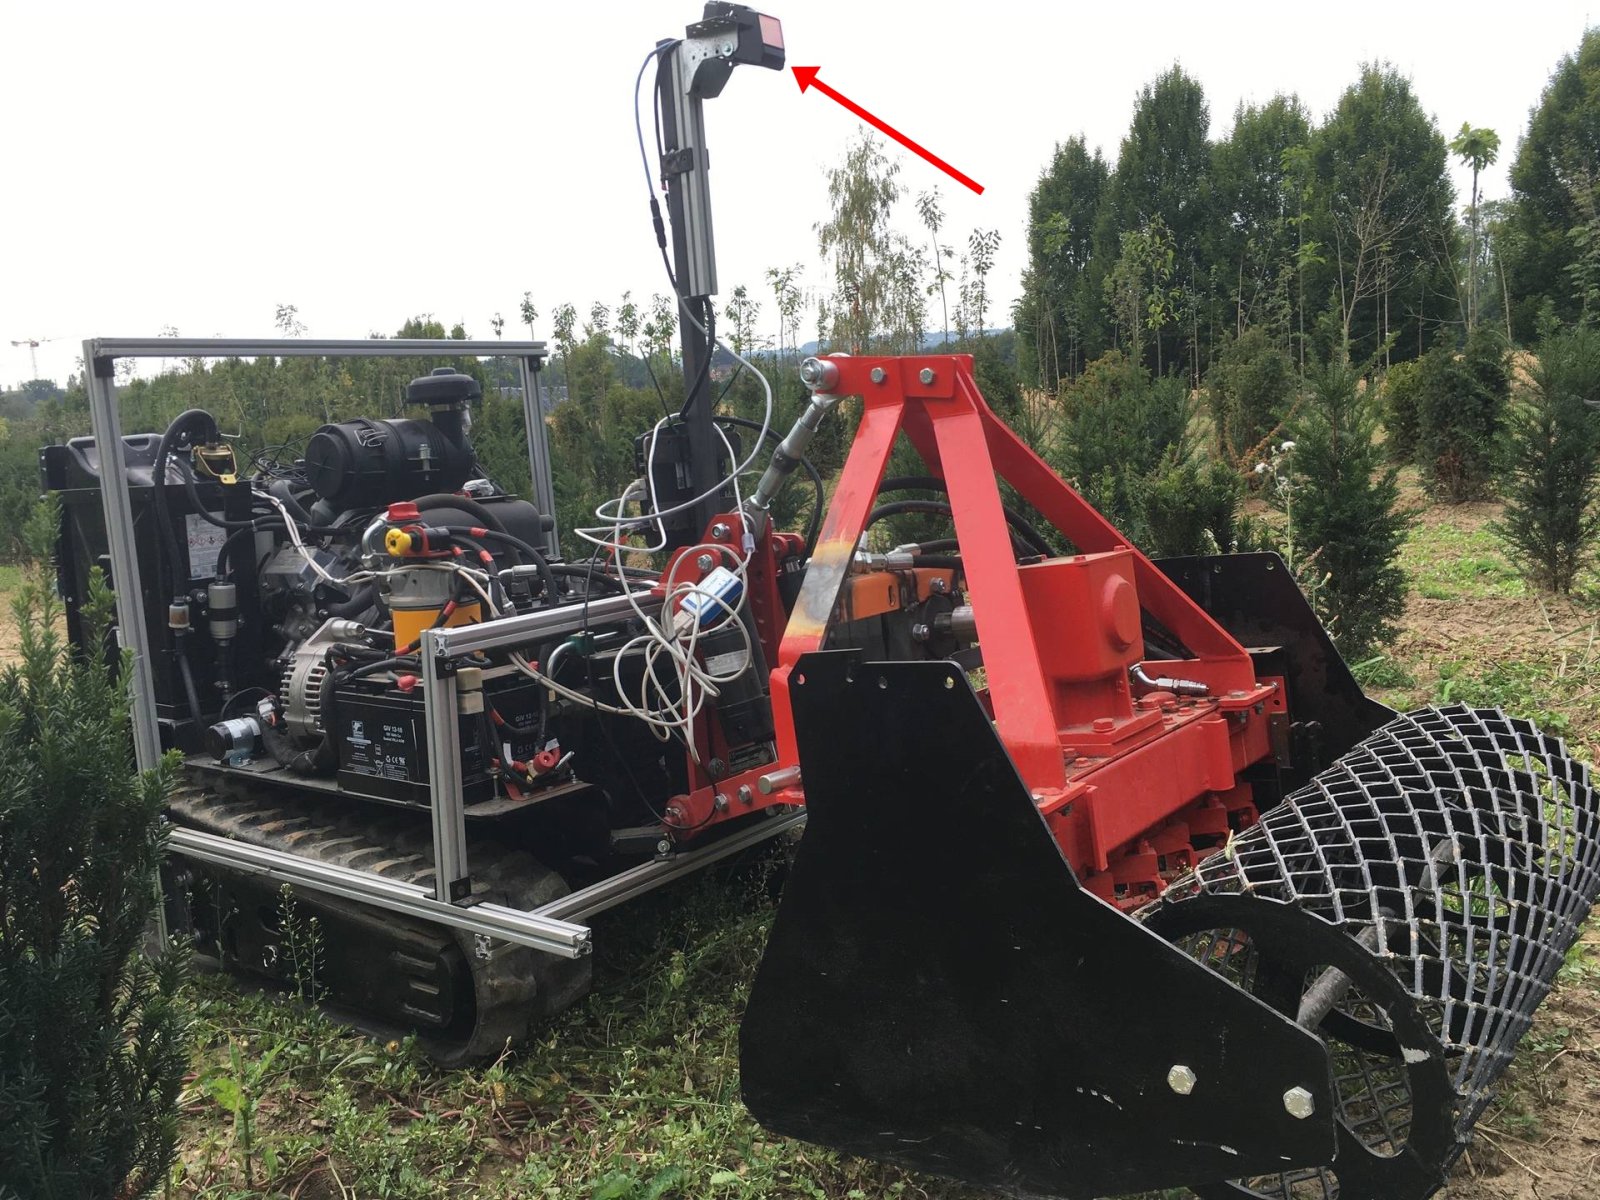 The LiDAR scanner (red arrow) installed in AMU-Bot continuously emits laser pulses as the vehicle moves, which the system uses to determine the position of the crop rows.